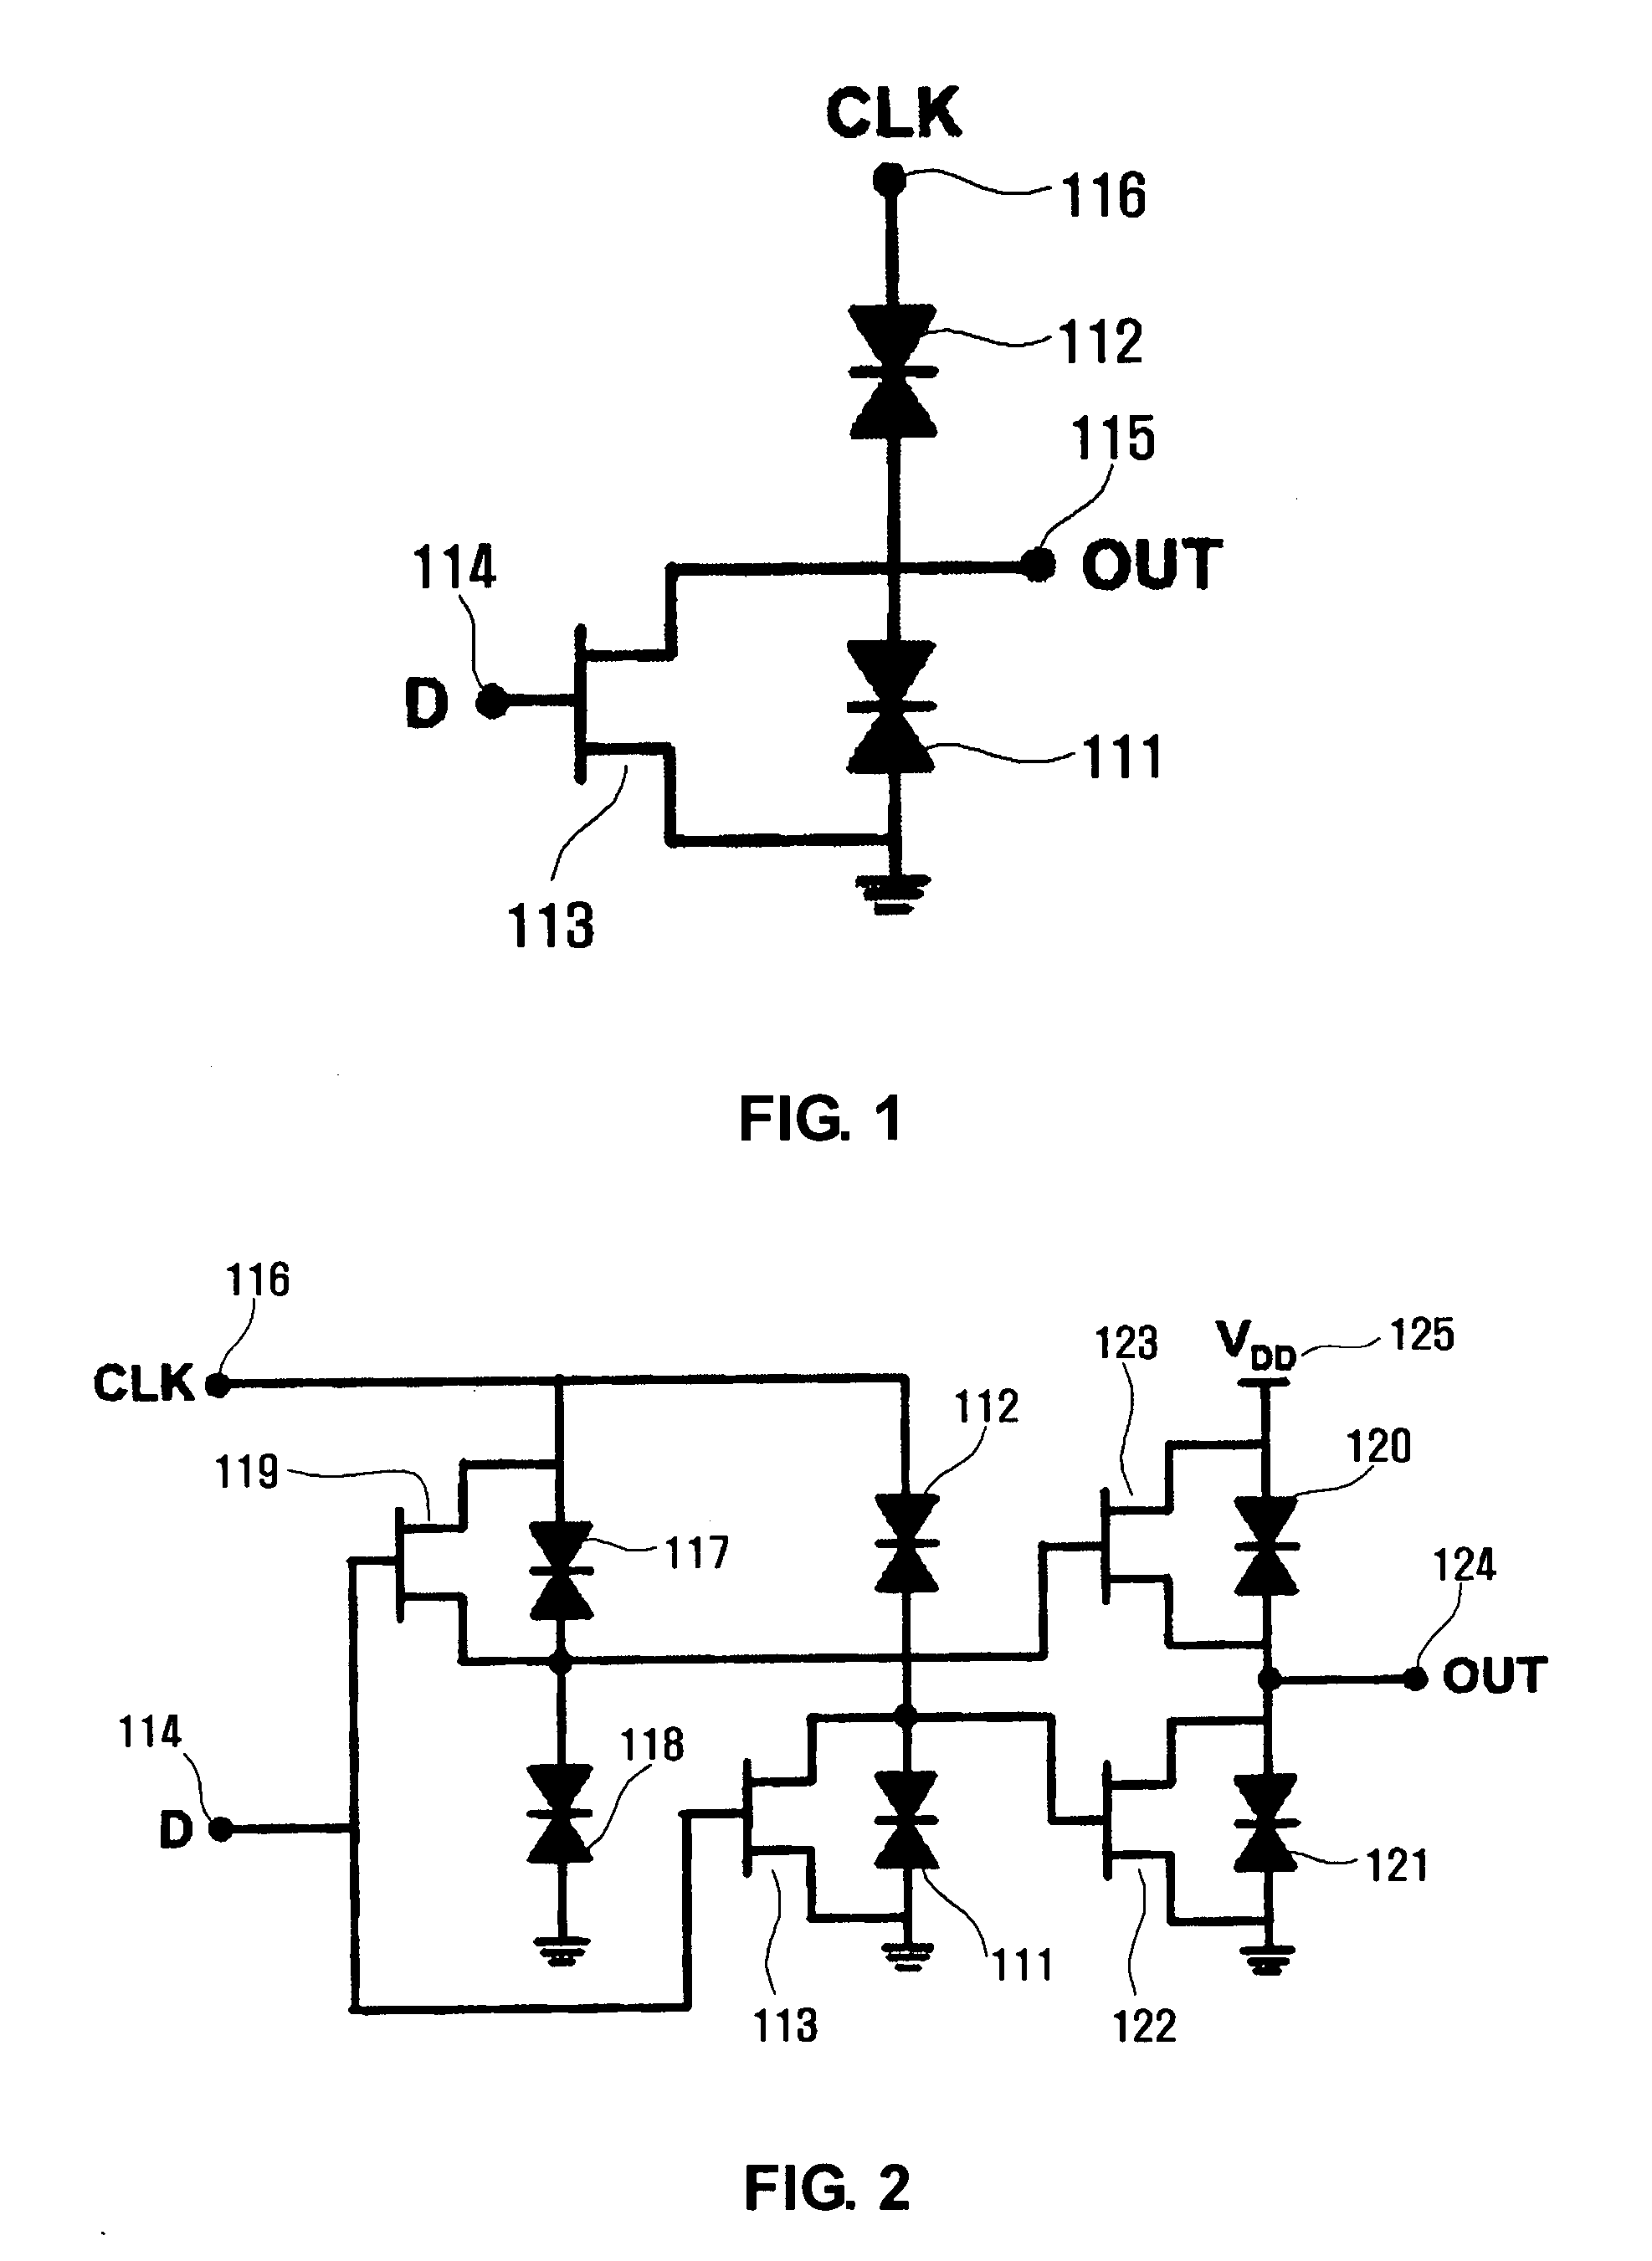 SET/RESET latch circuit, Schmitt trigger circuit, and MOBILE based D-type flip flop circuit and frequency divider circuit thereof